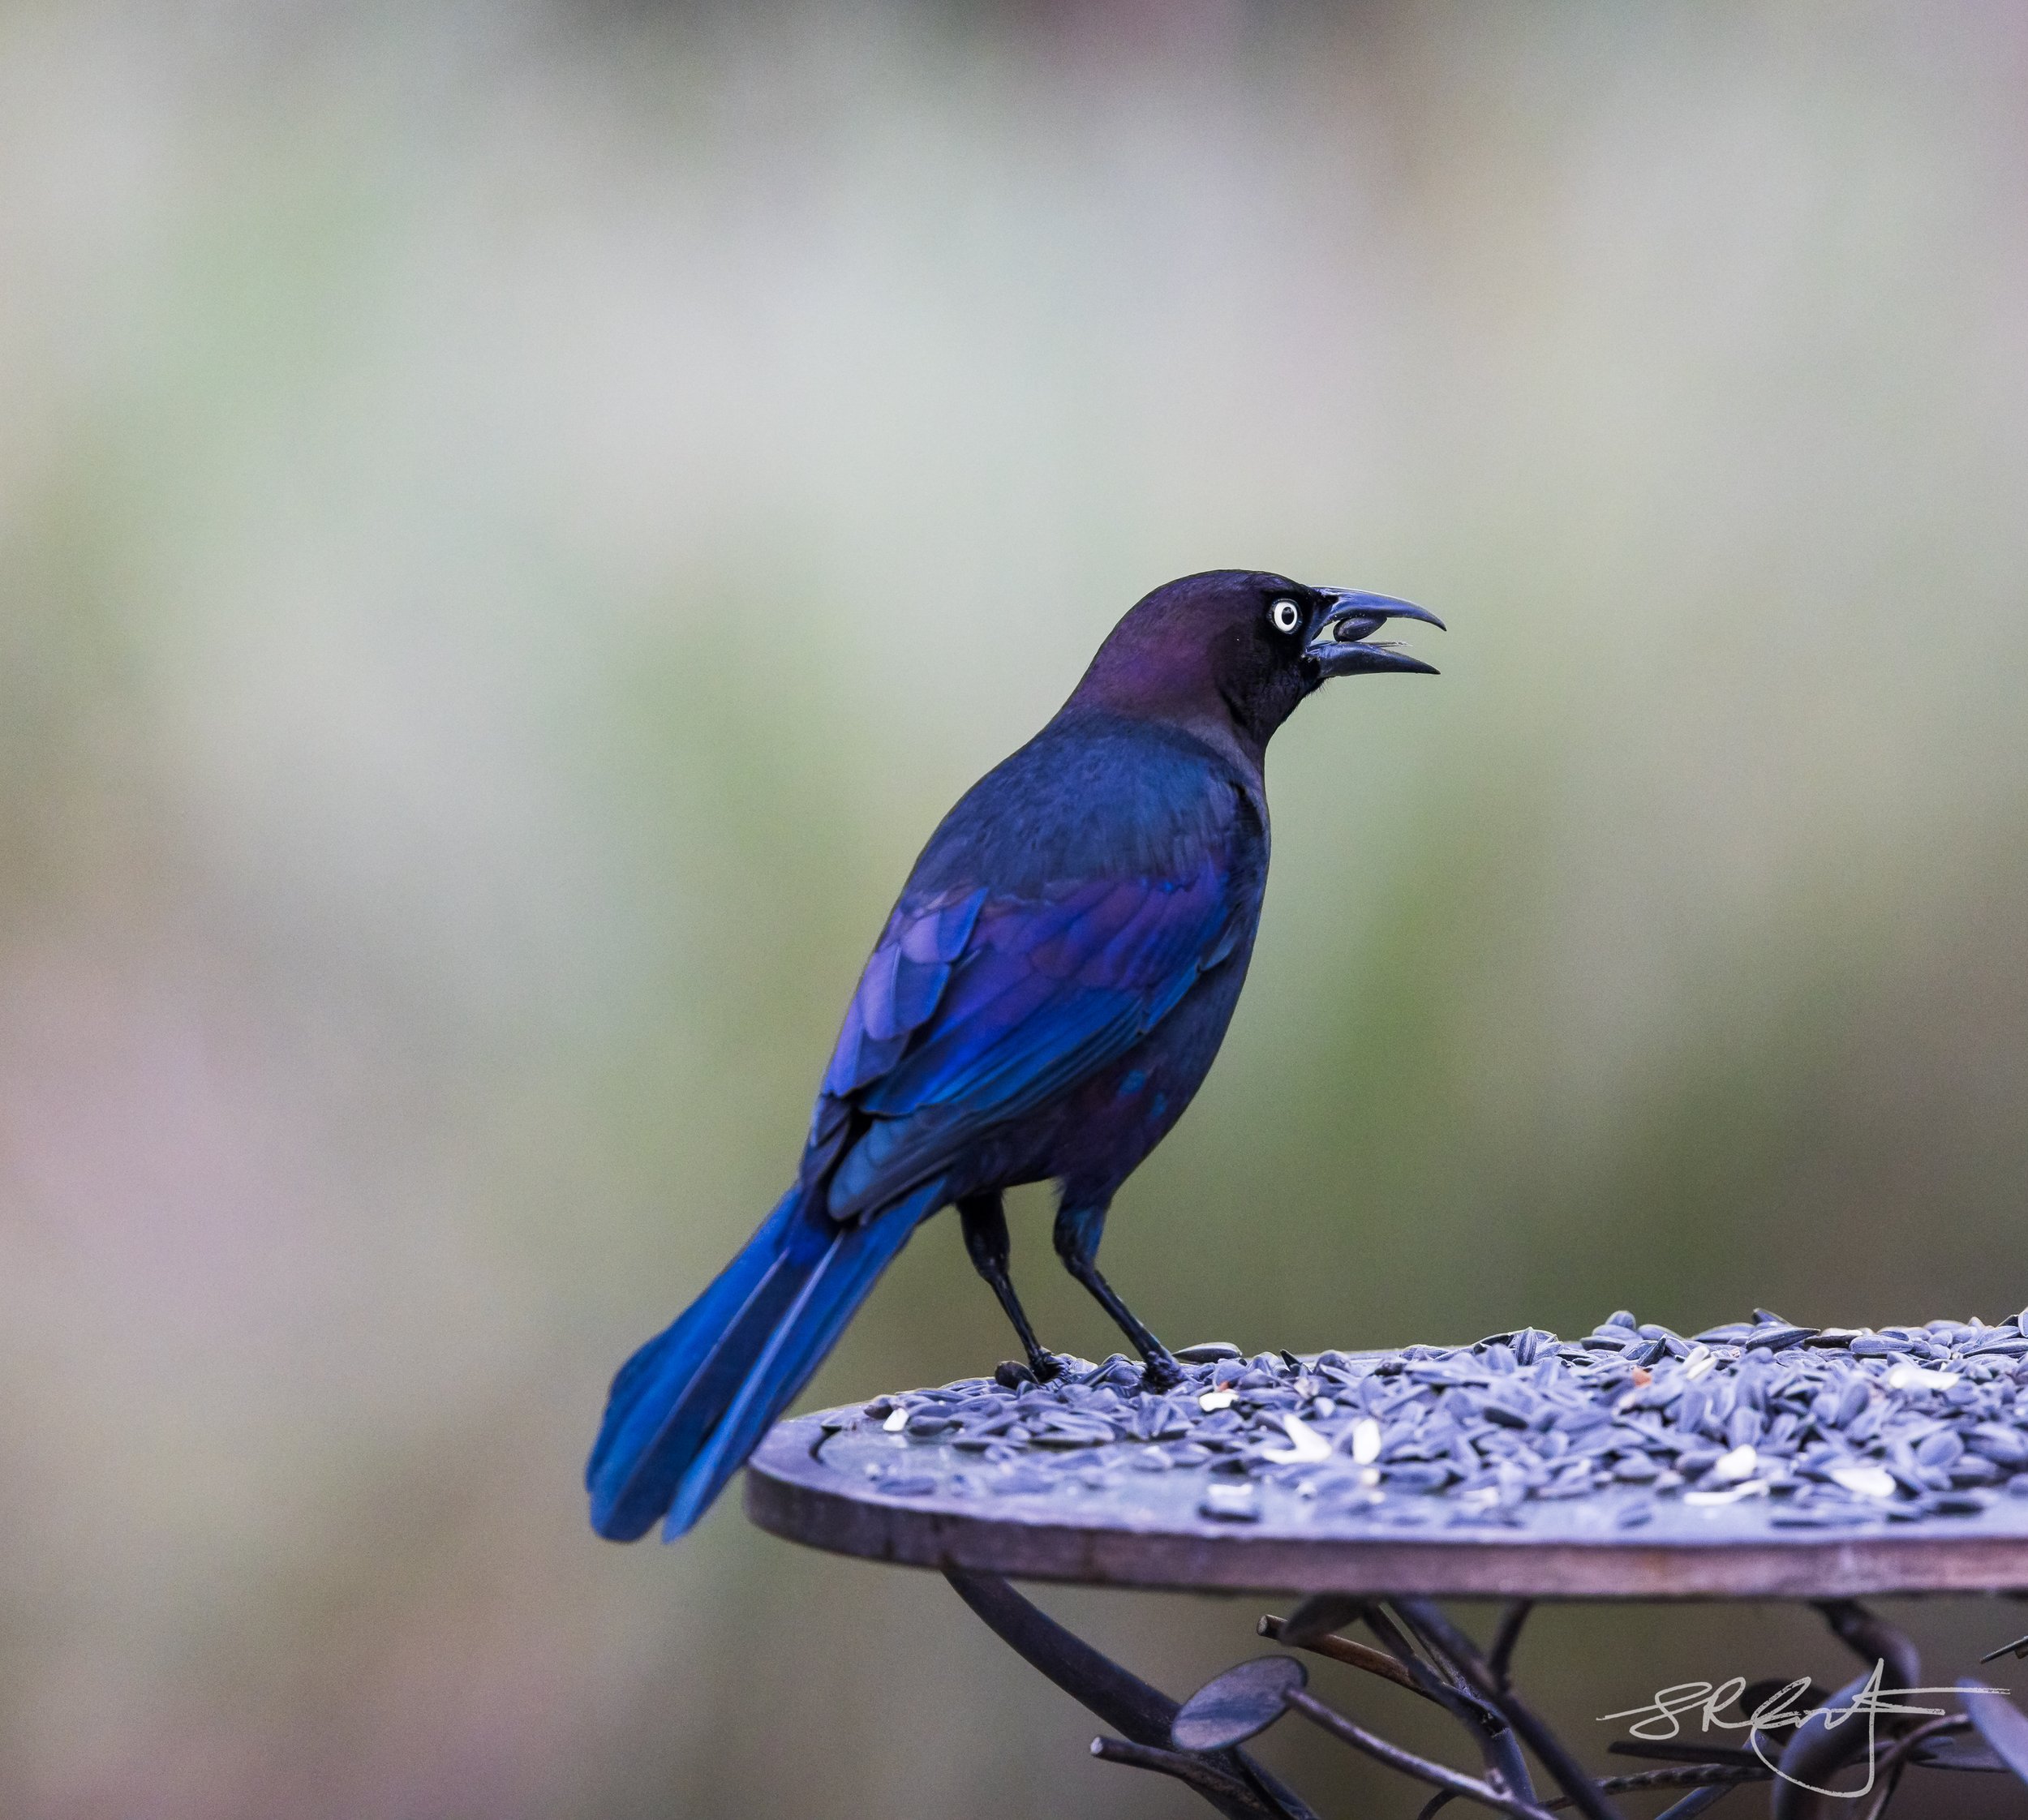 The beautiful irridescence of the Common Grackle